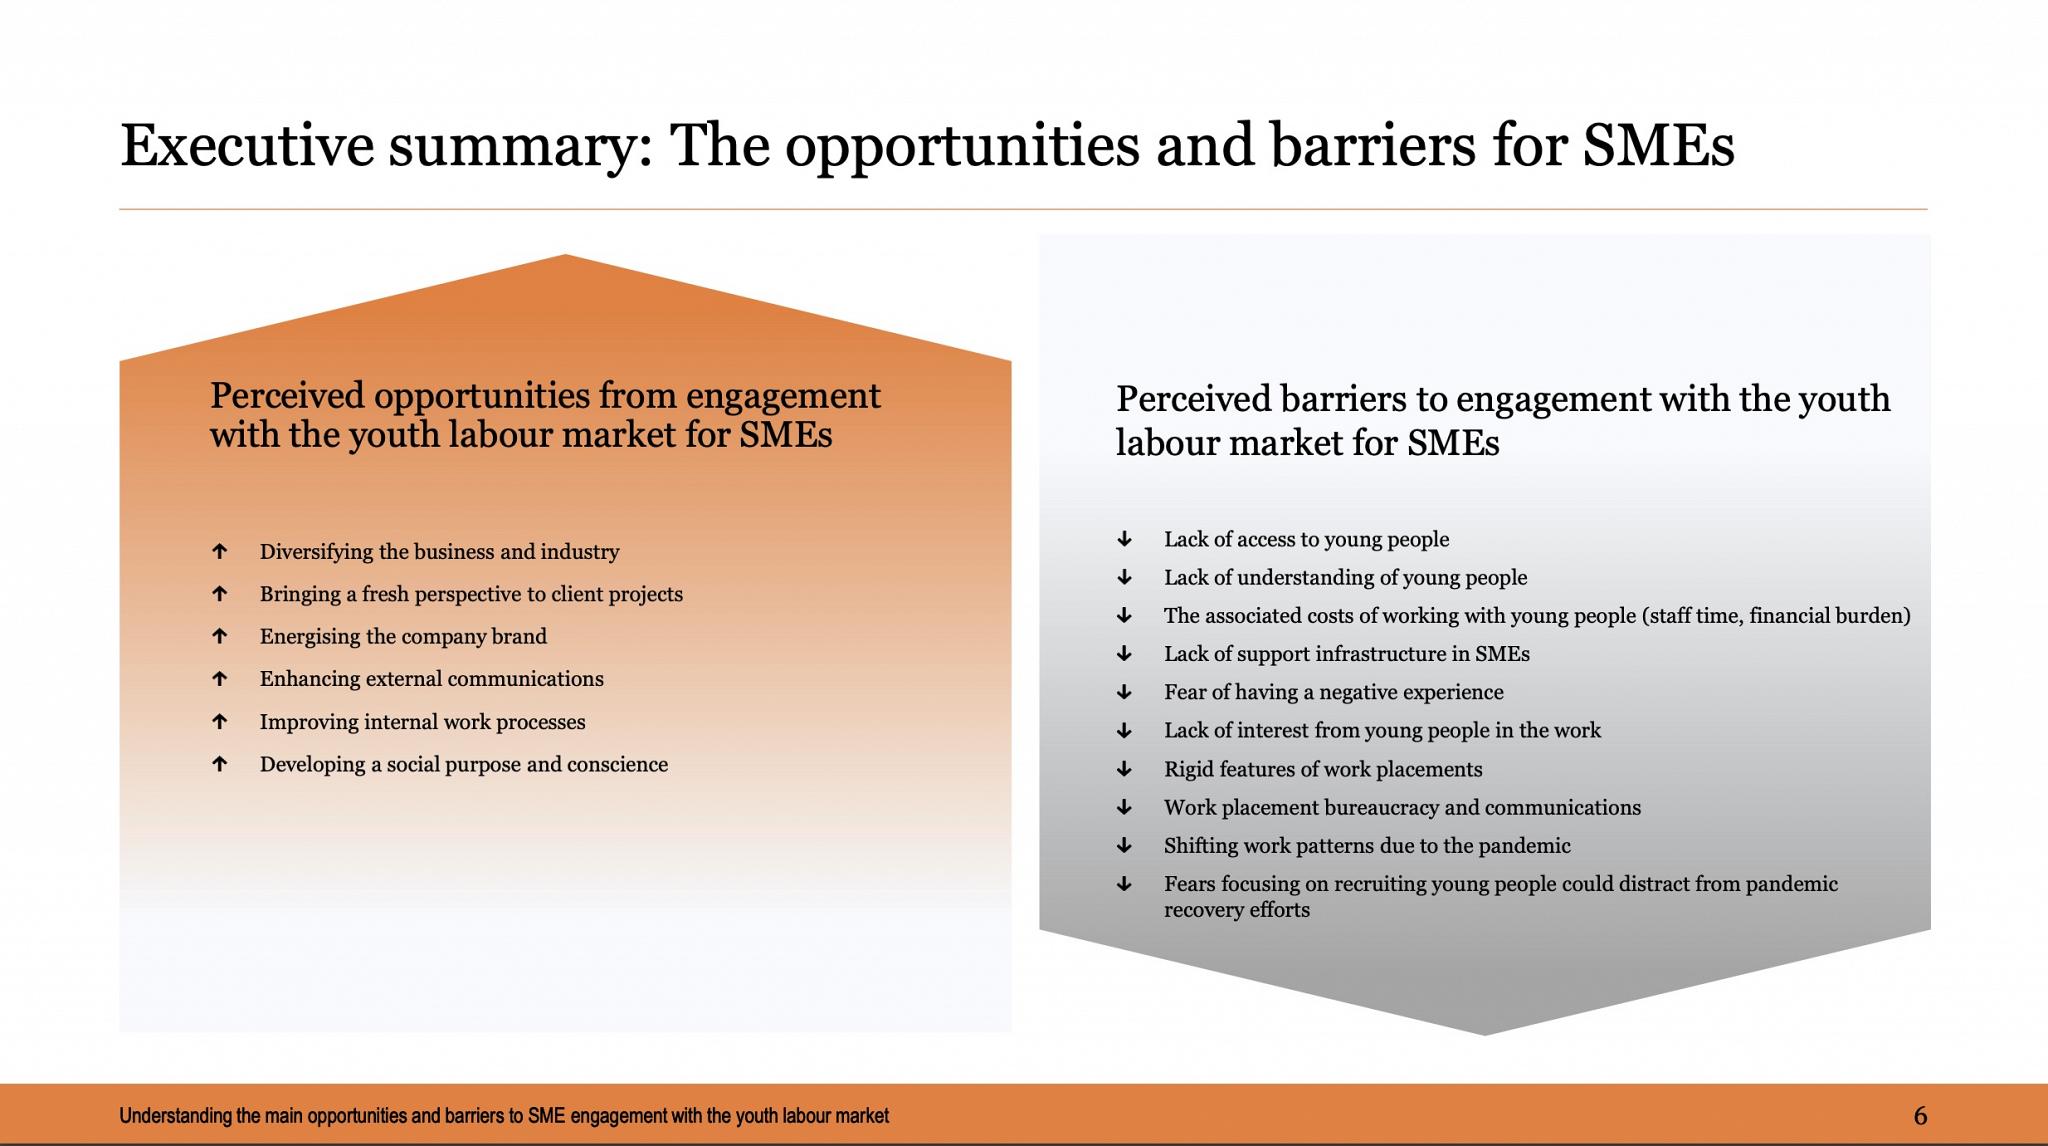 Opportunities and barriers for SMEs